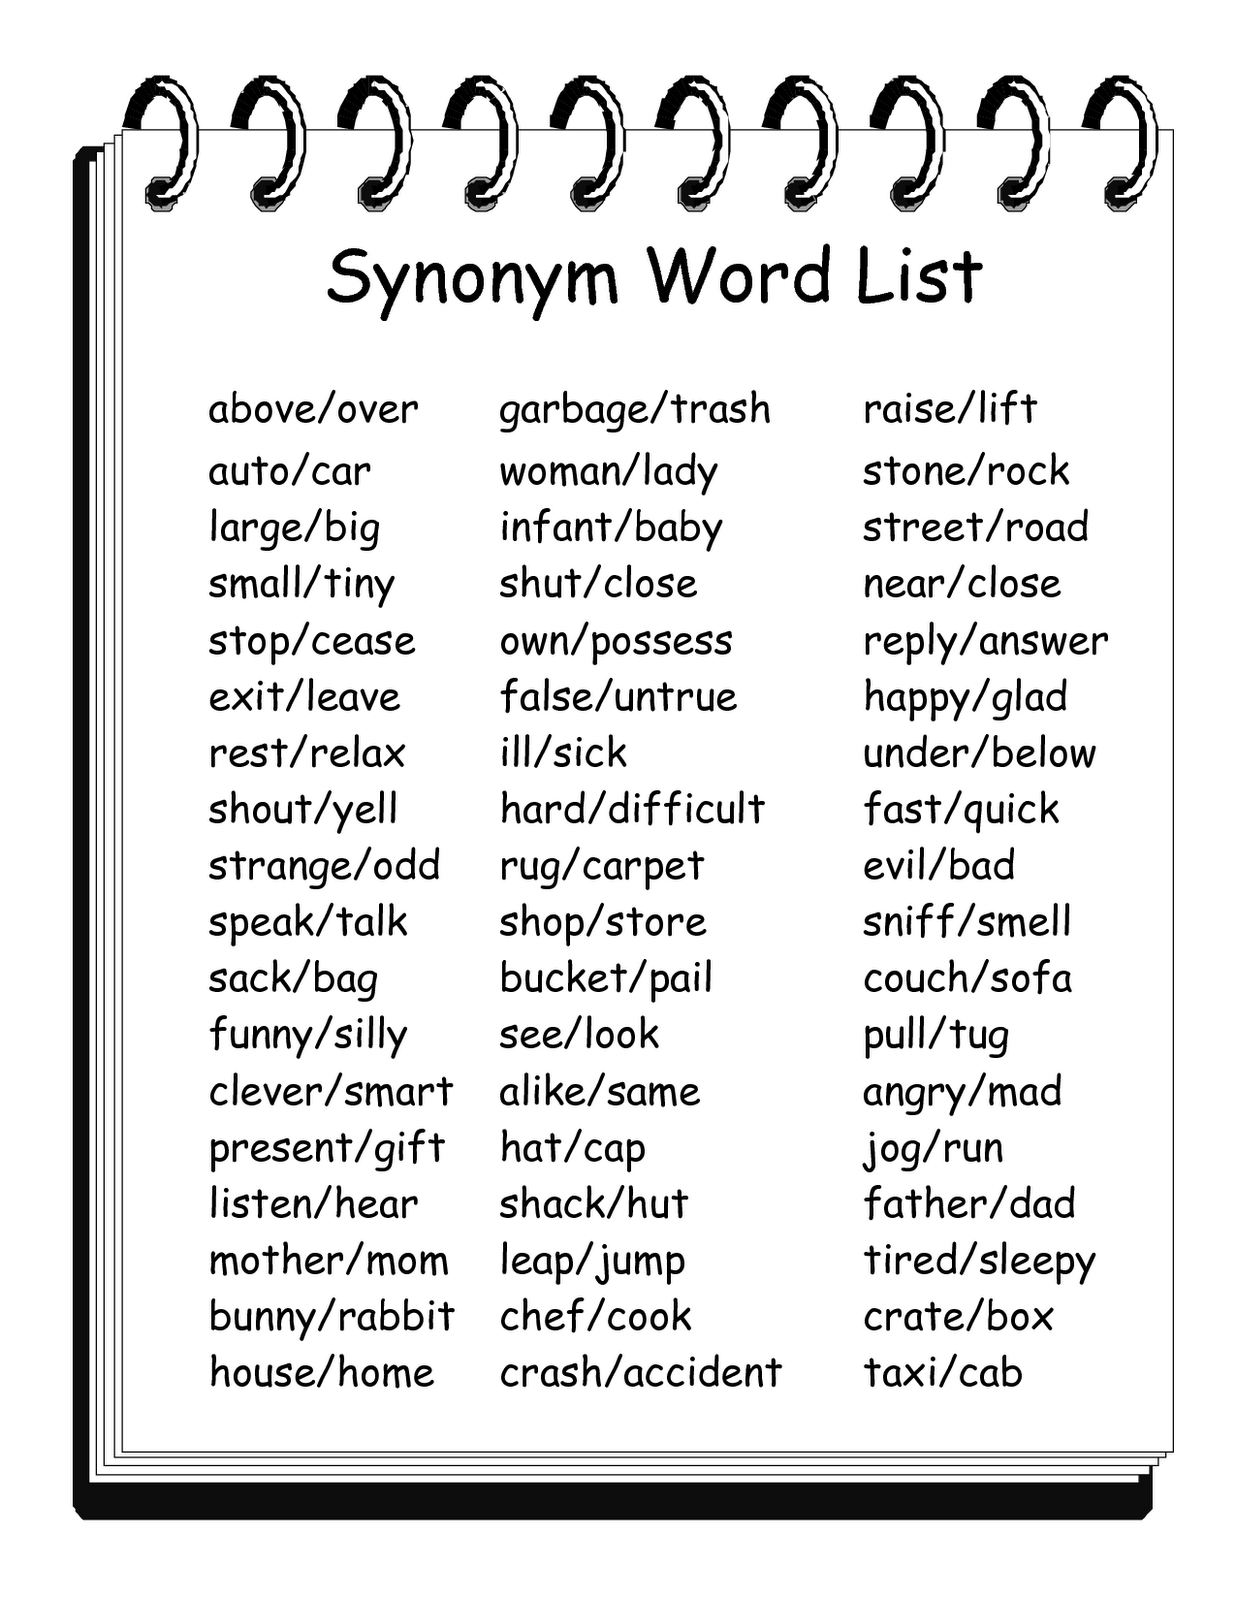 To need synonyms